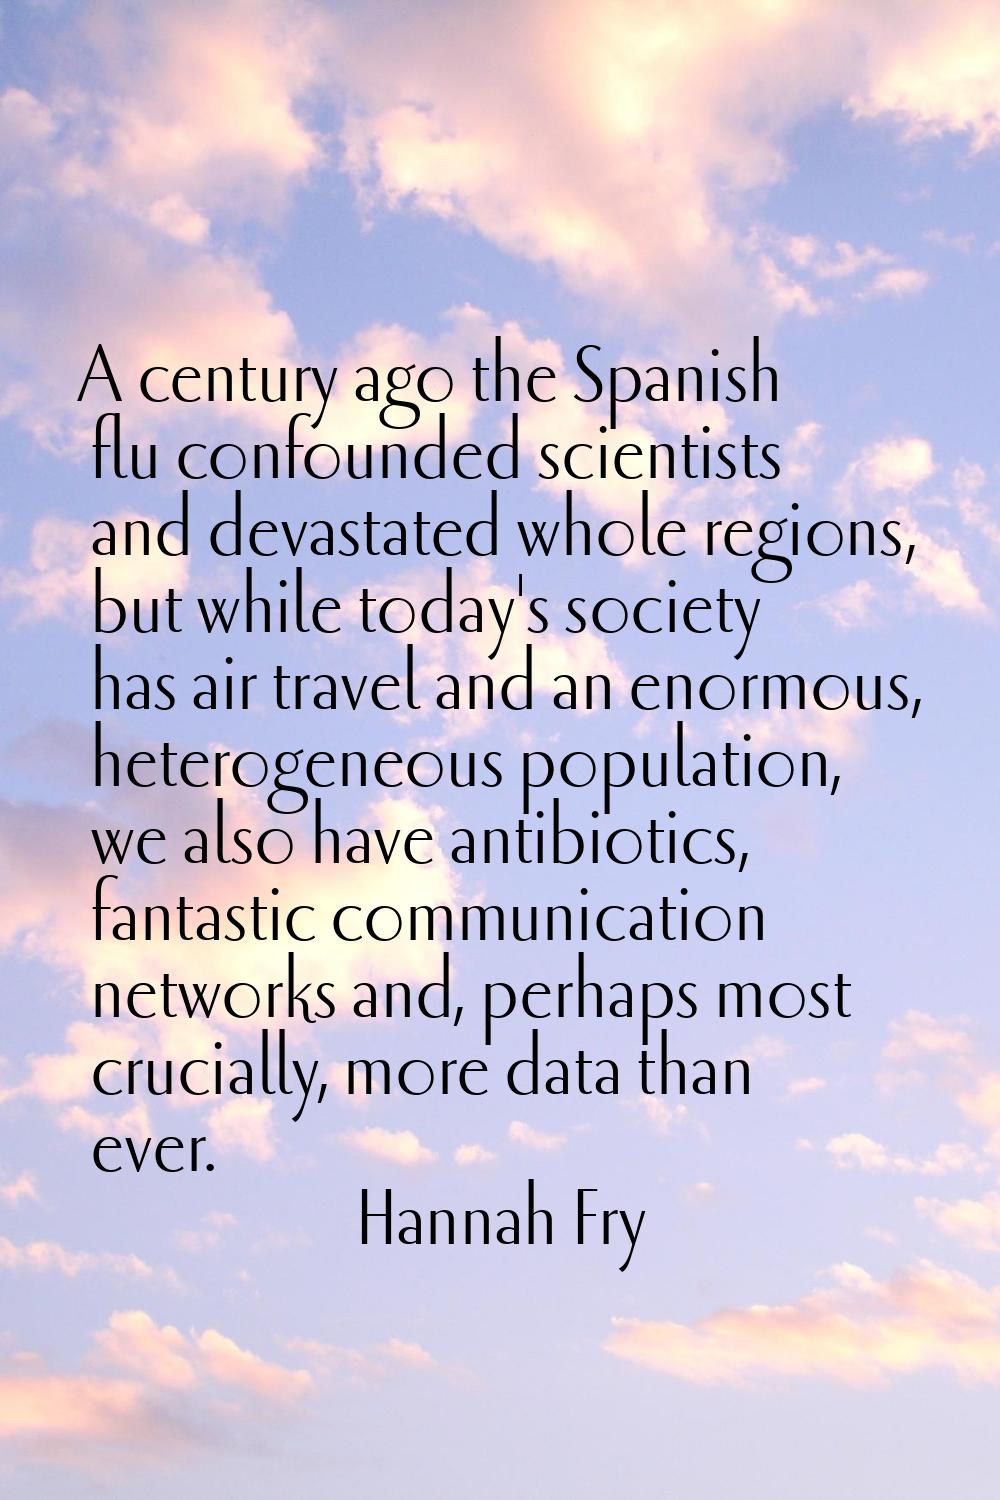 A century ago the Spanish flu confounded scientists and devastated whole regions, but while today's